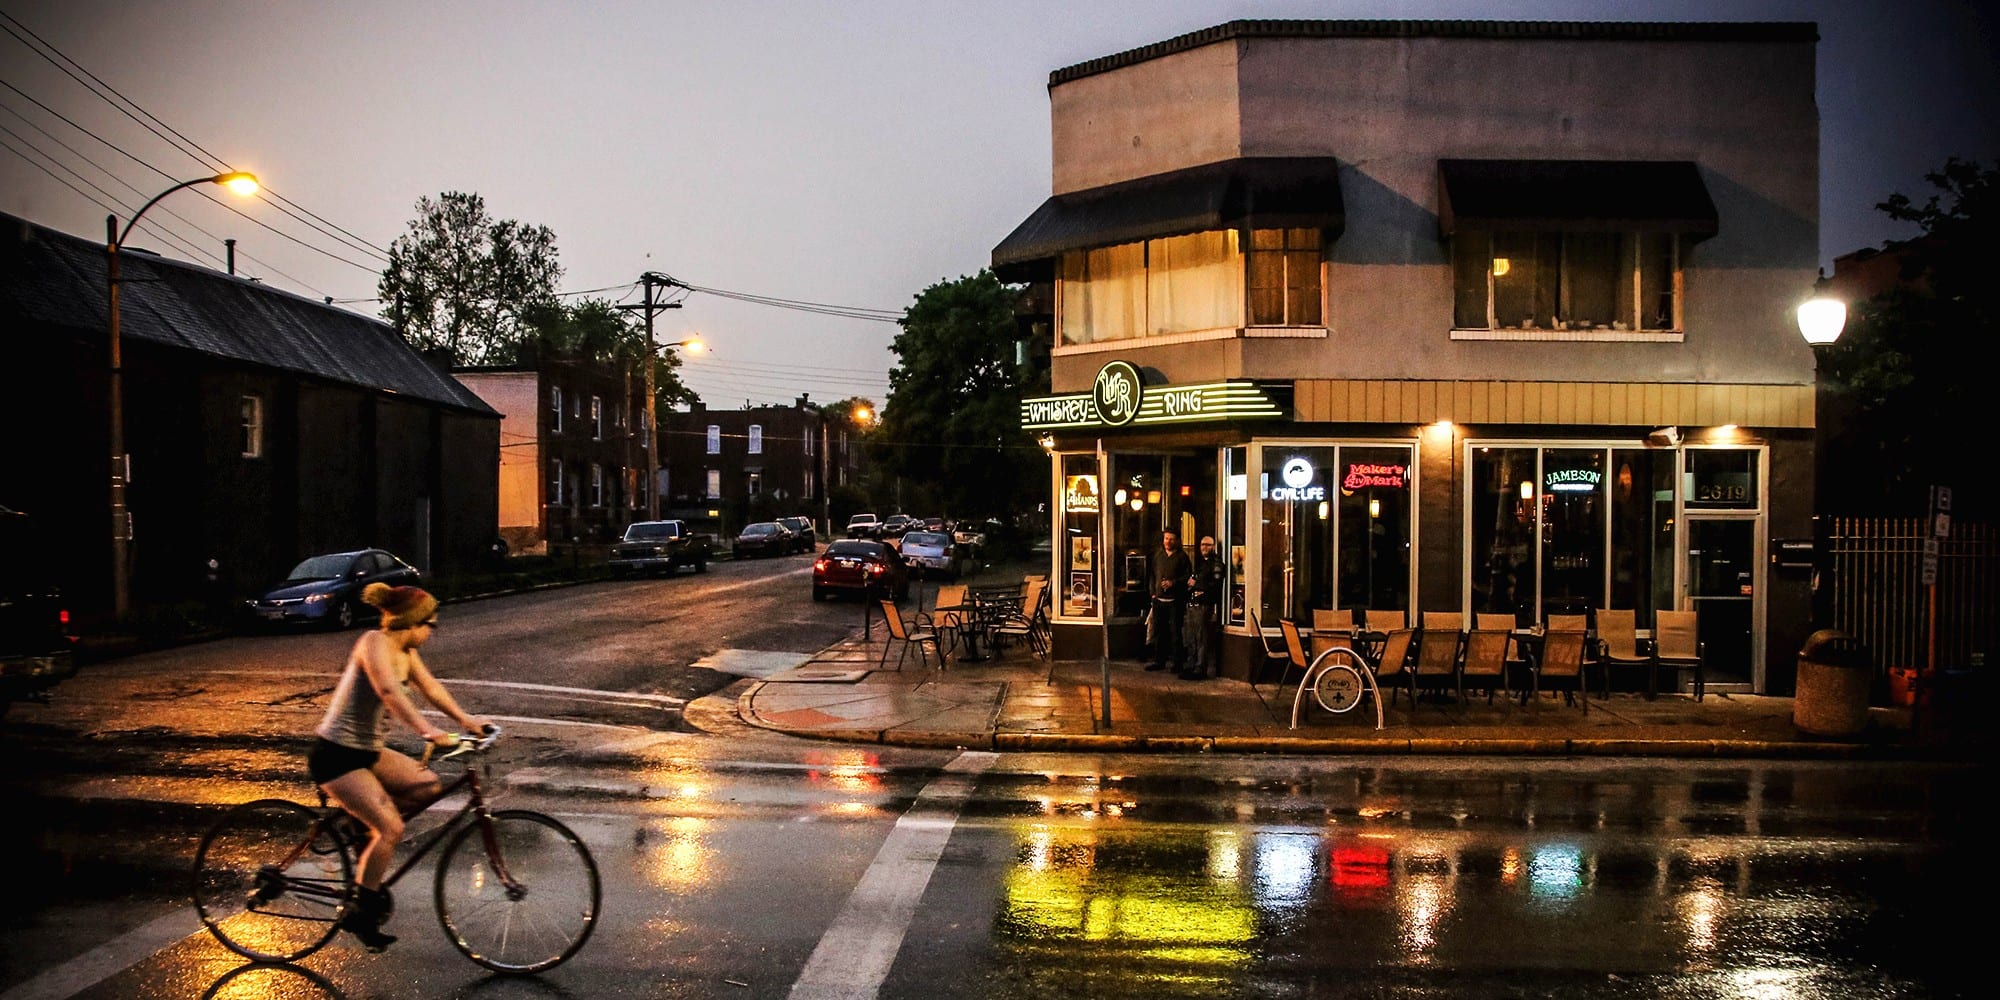 The Whiskey Ring on Cherokee Street. Photo by Paul Sableman.